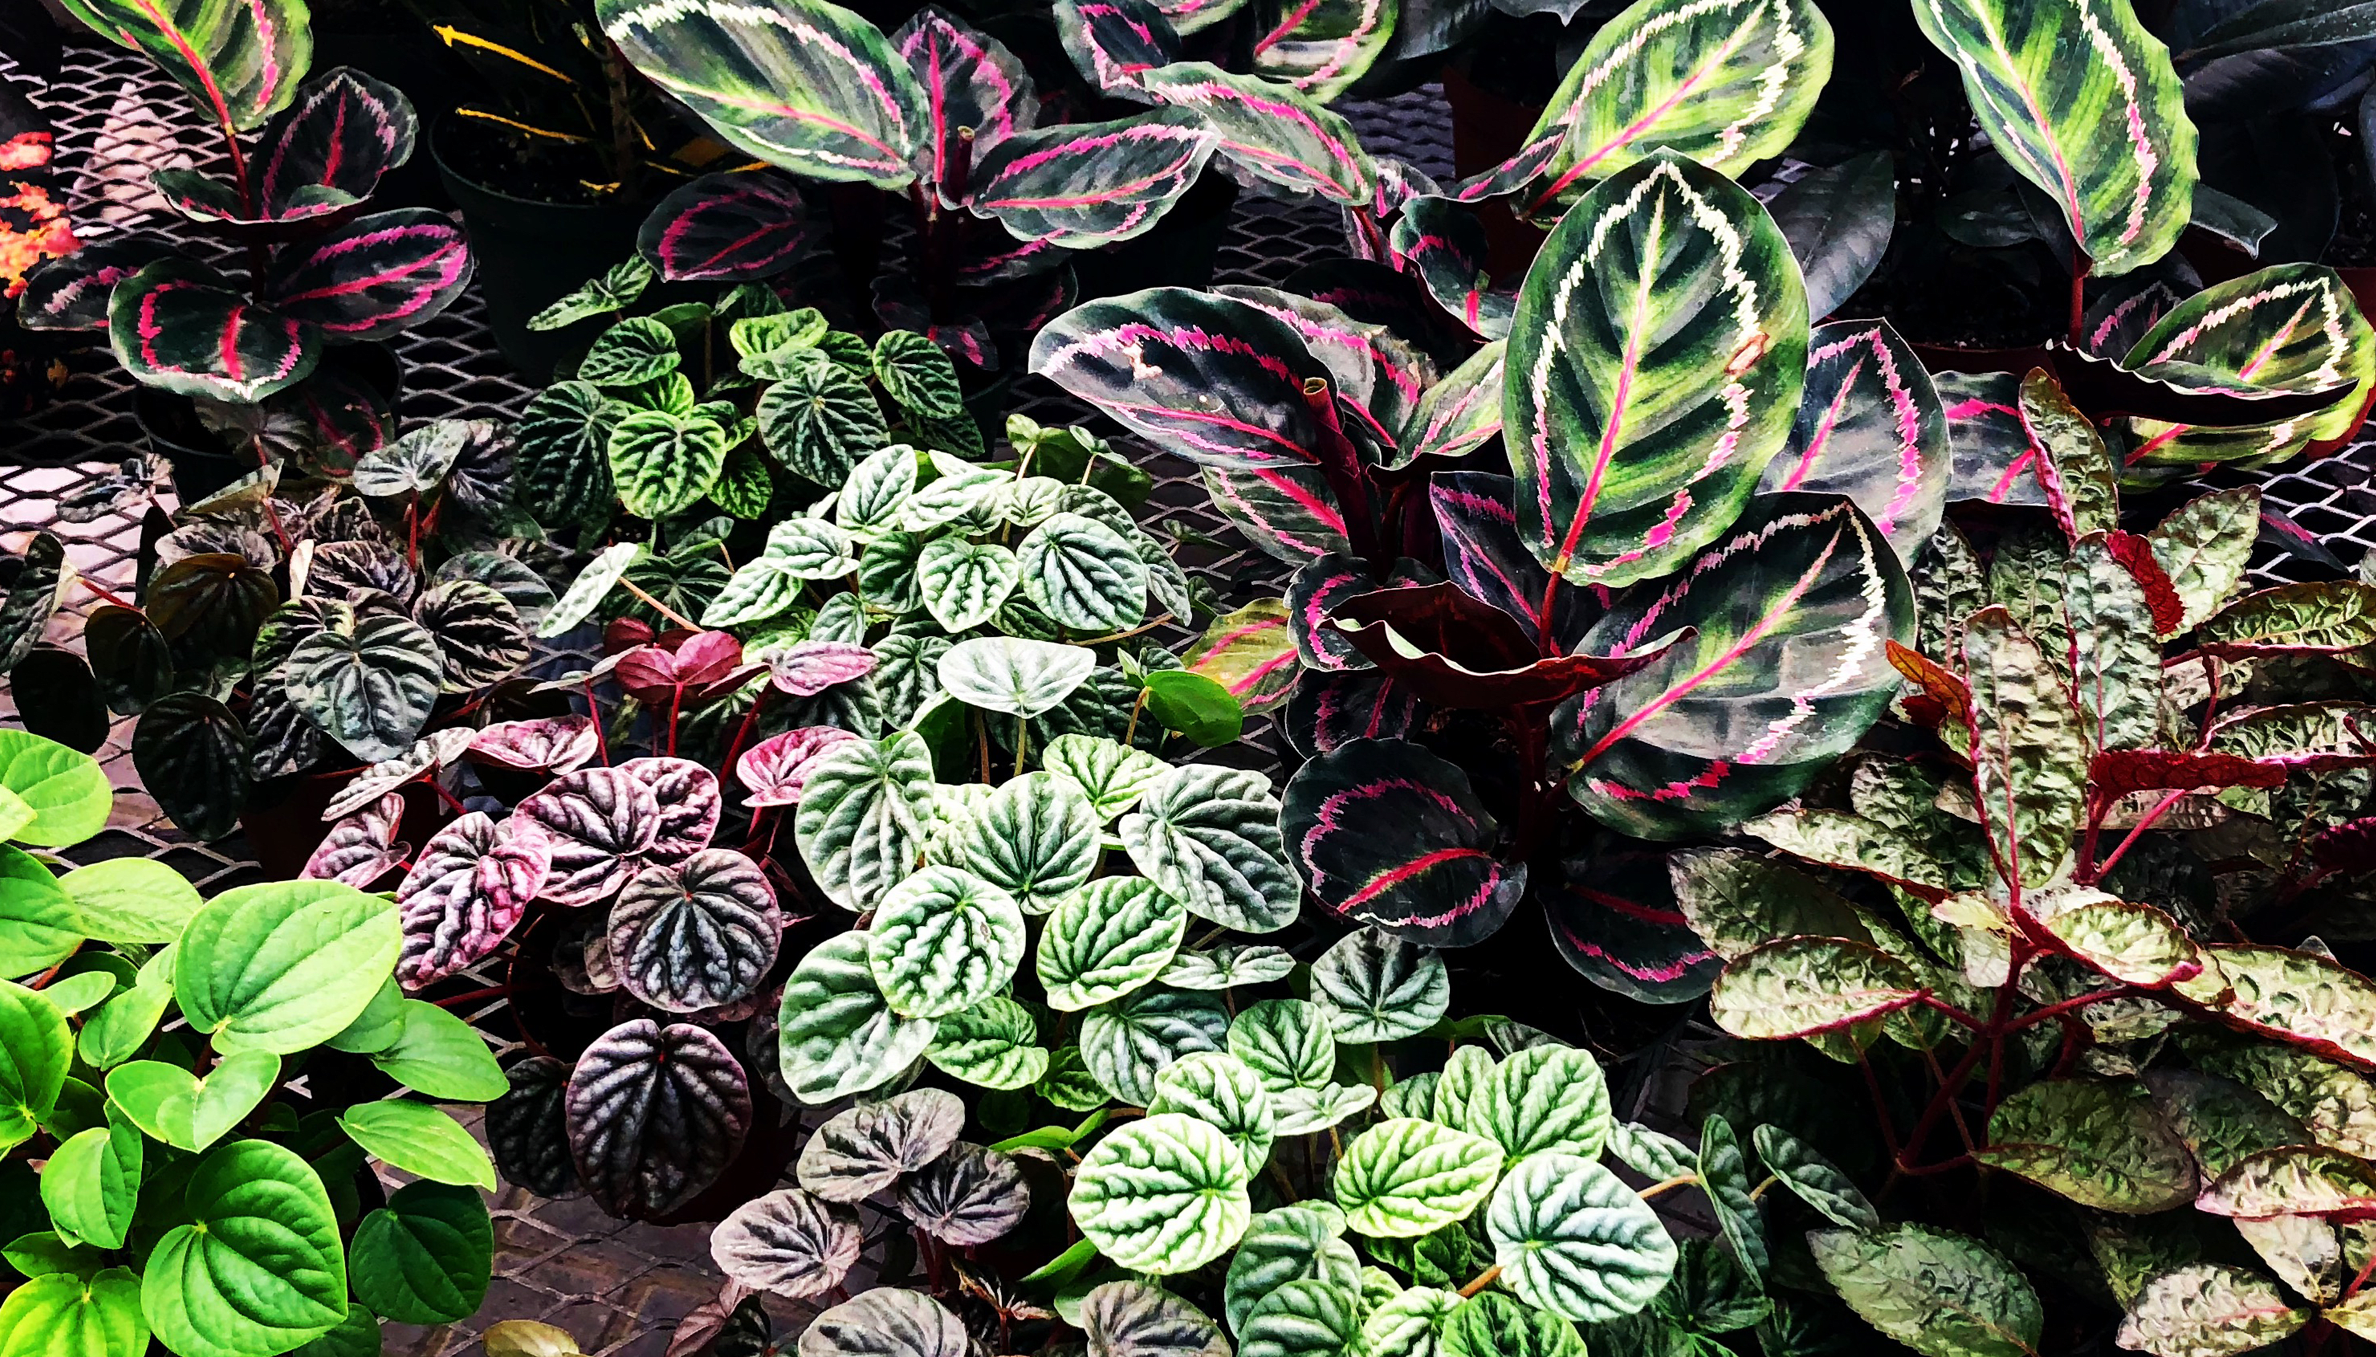 Plant care made easy - care guide for your houseplants